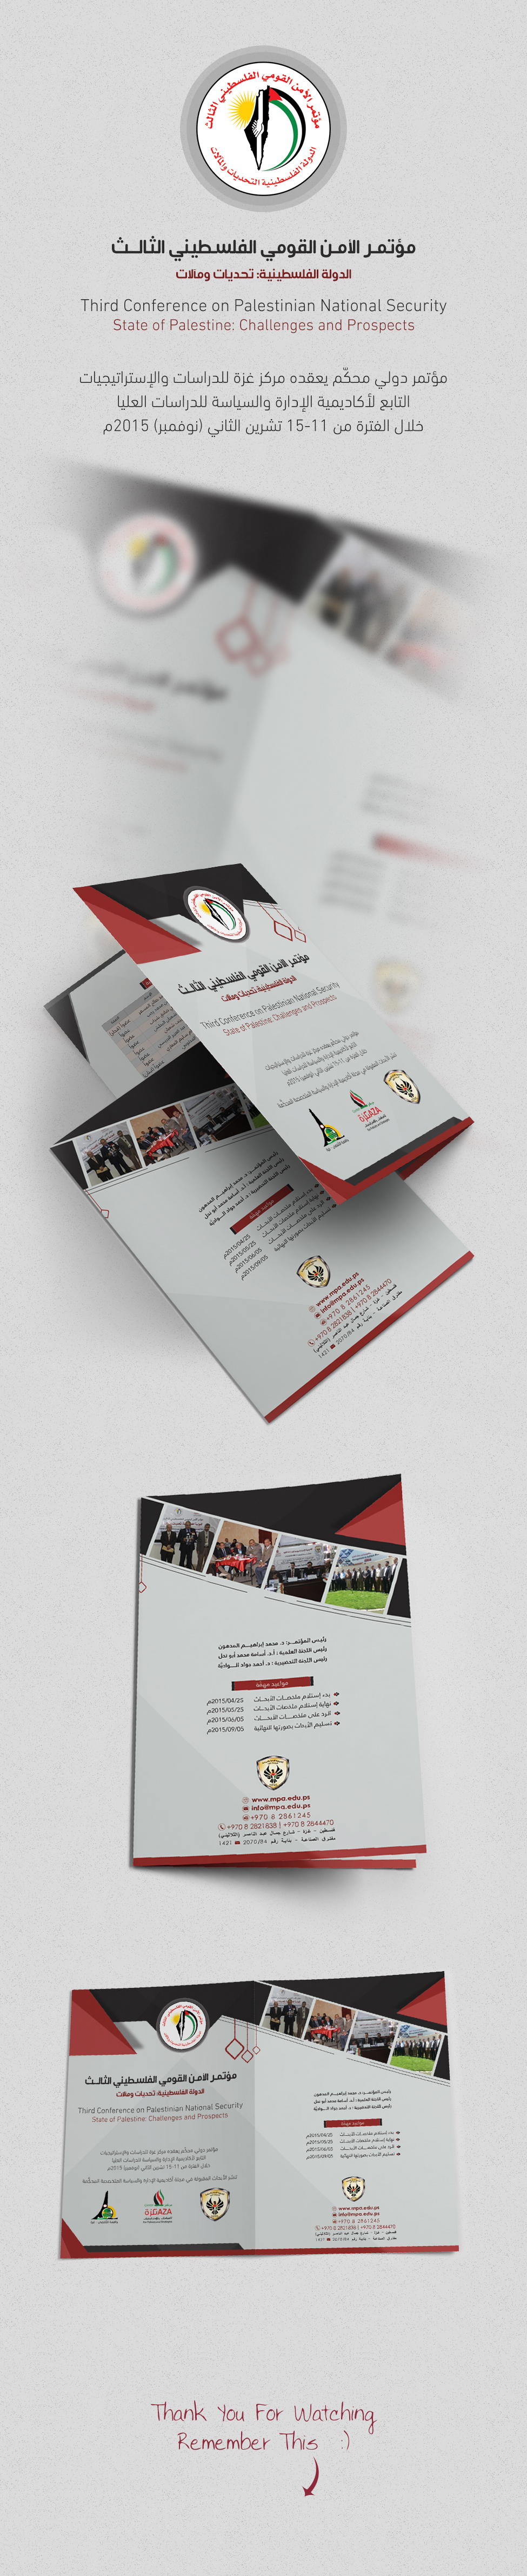 palestinian national security palestine conference brochure